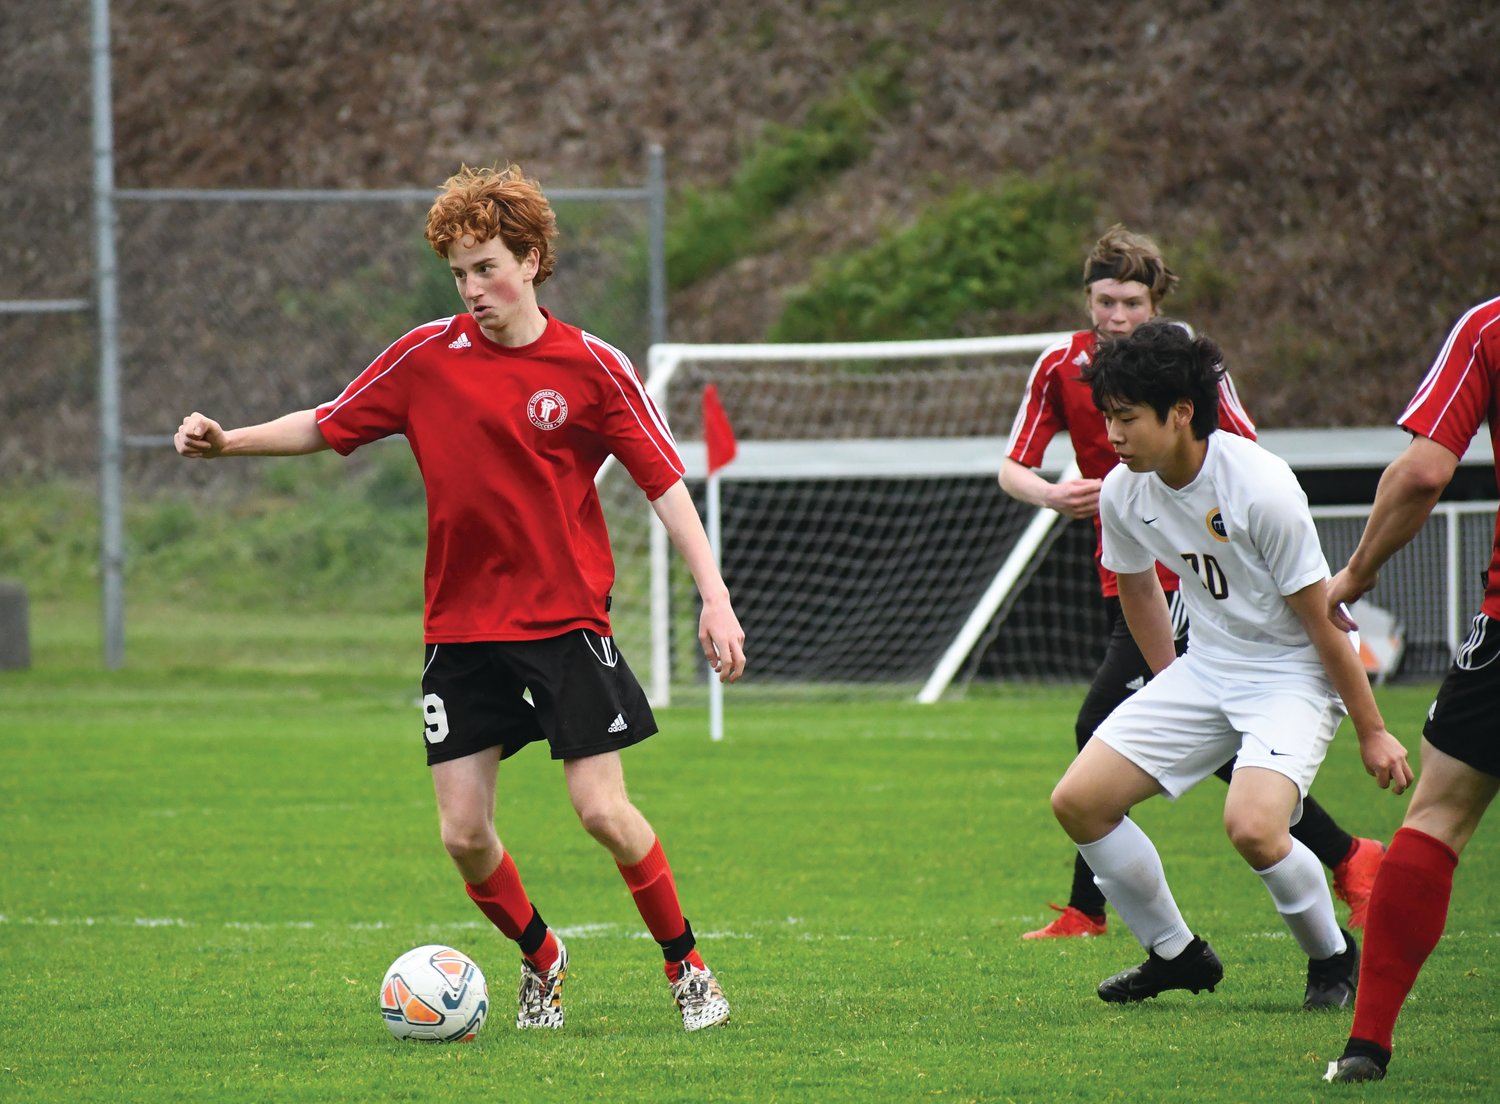 Mark Anderson moves forward with the ball in an East Jefferson Rivals soccer game in the spring.